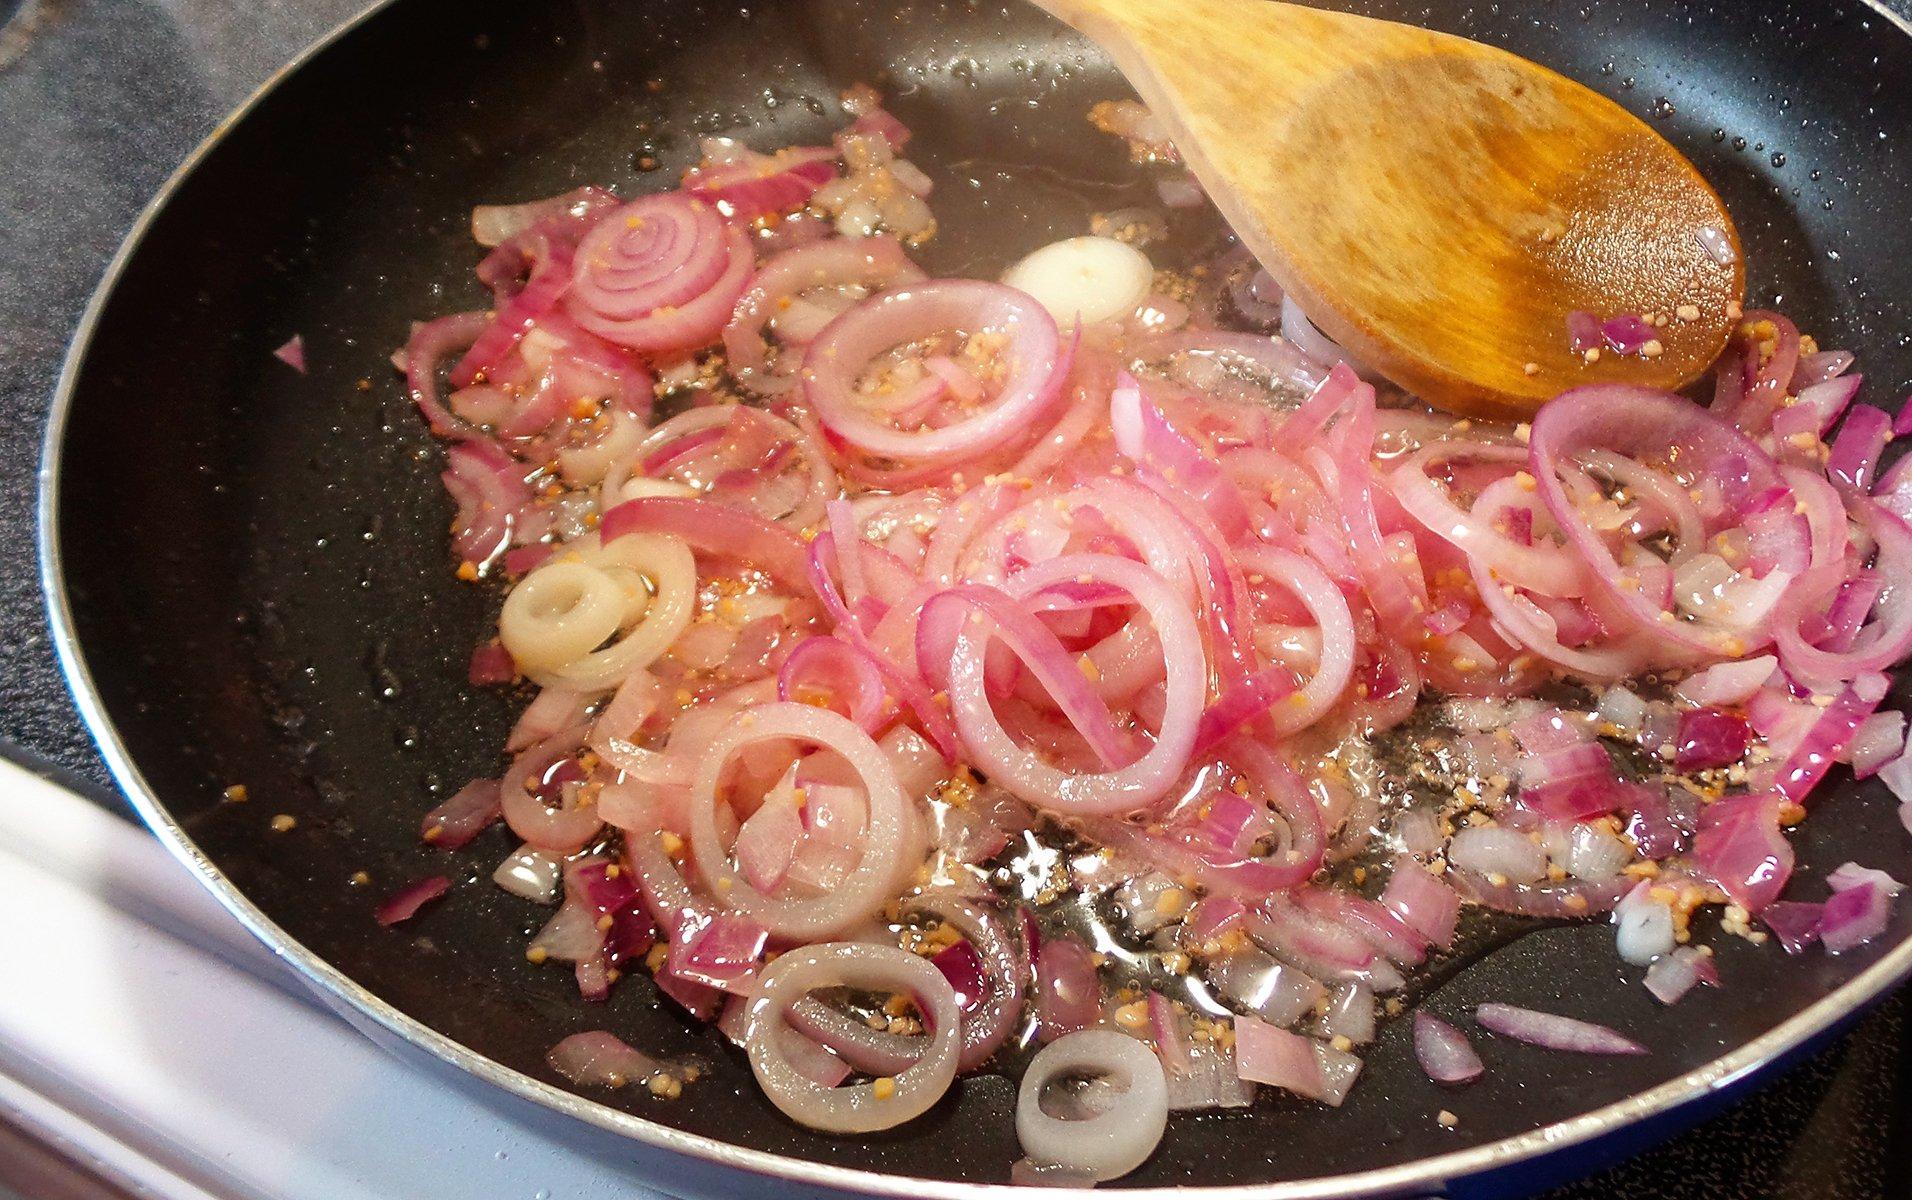 Saute the onions till soft, then add the garlic and chopped peppers.